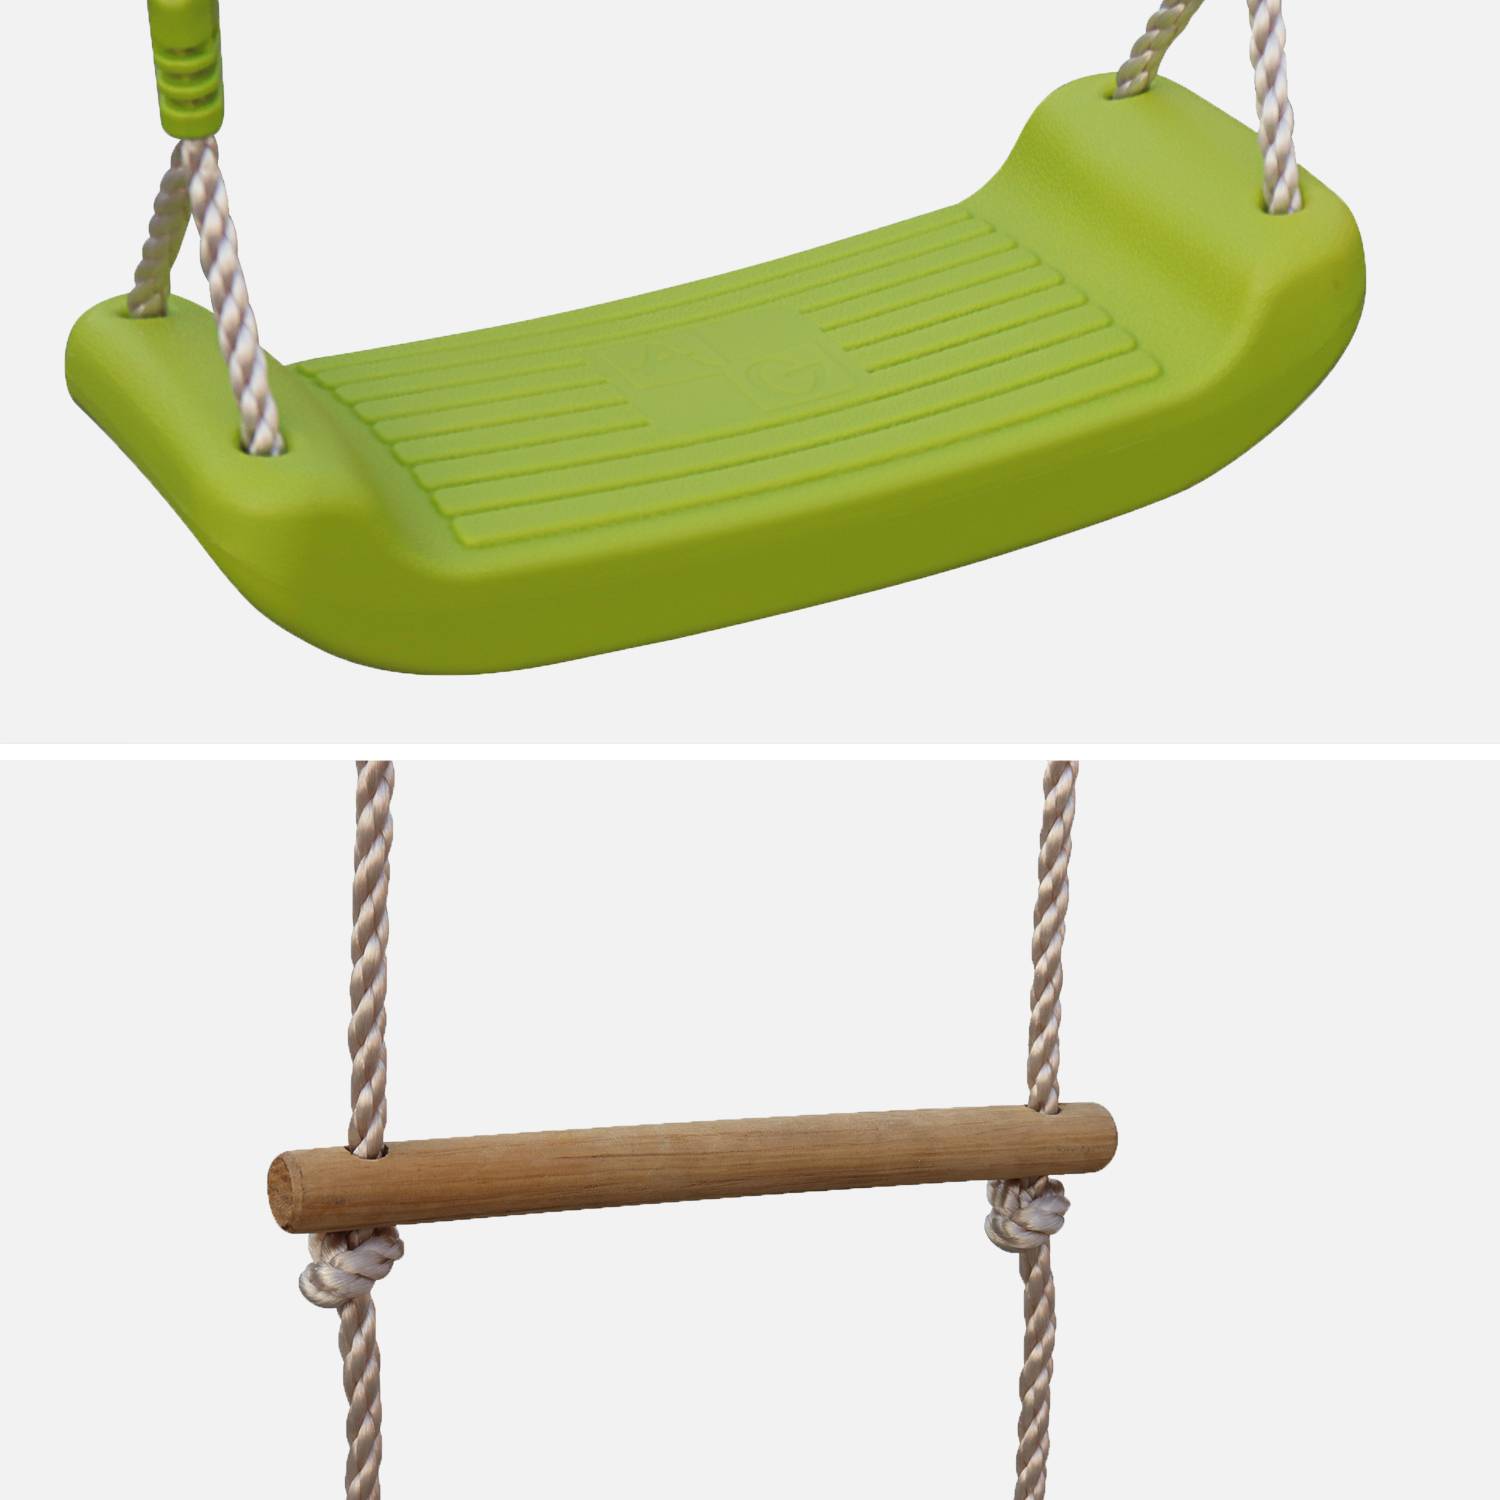 Wooden swing set with two swings and climbing rope ladder - pressure treated FSC pine - Mistral Photo4